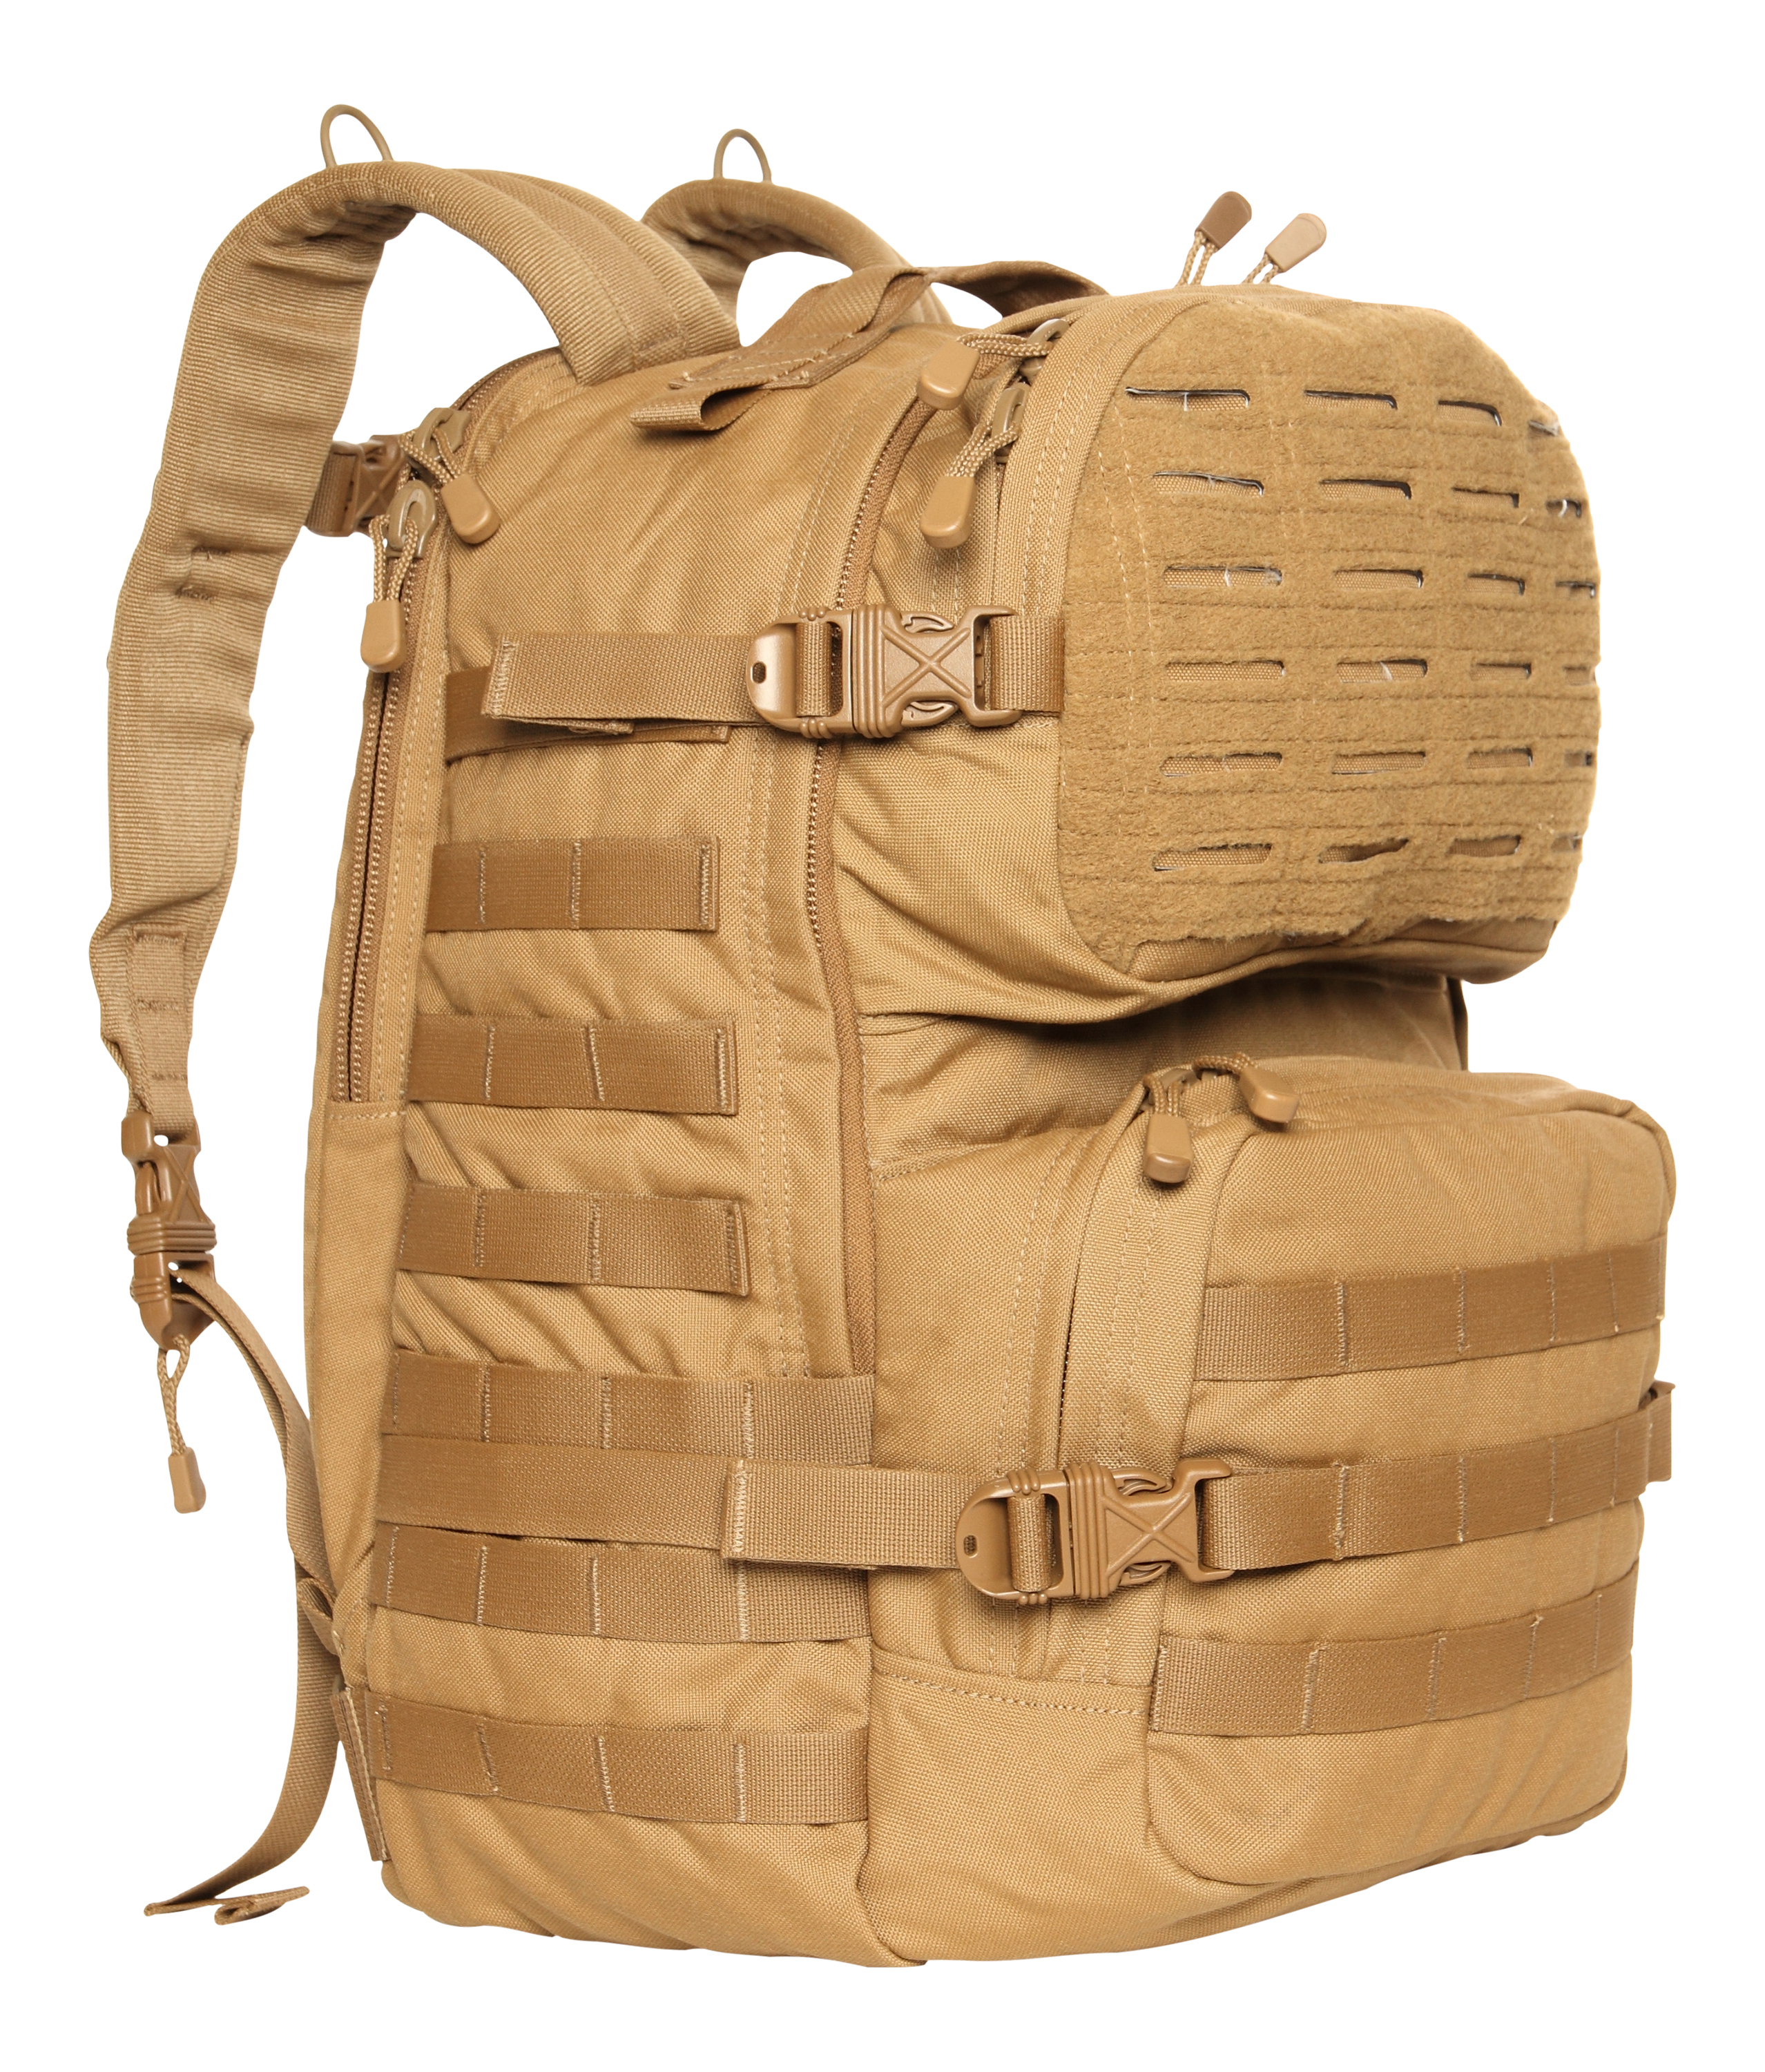 Tacprogear Spec-Ops Assault Pack Large Coyote Tan B-SAP3-CT 